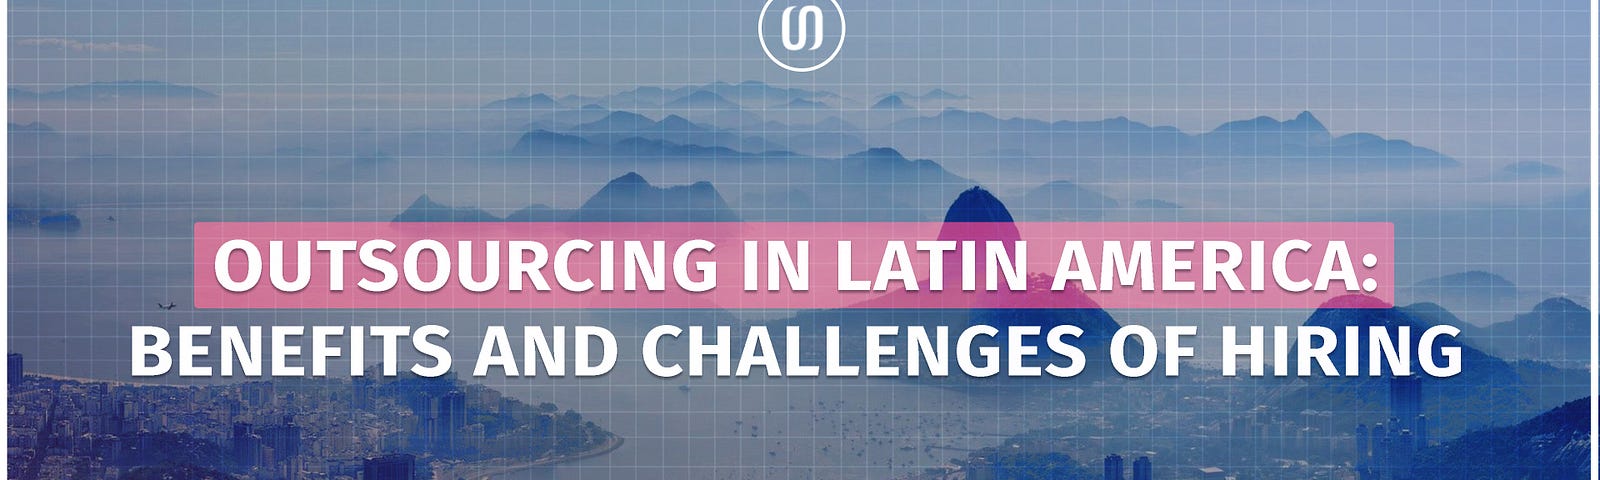 Benefits and challenges of hiring IT developers in LATAM, the burgeoning tech hubs, and the impact of game-changing technologies. The article also provides valuable insights and practical tips to navigate the IT hiring landscape in Latin America.